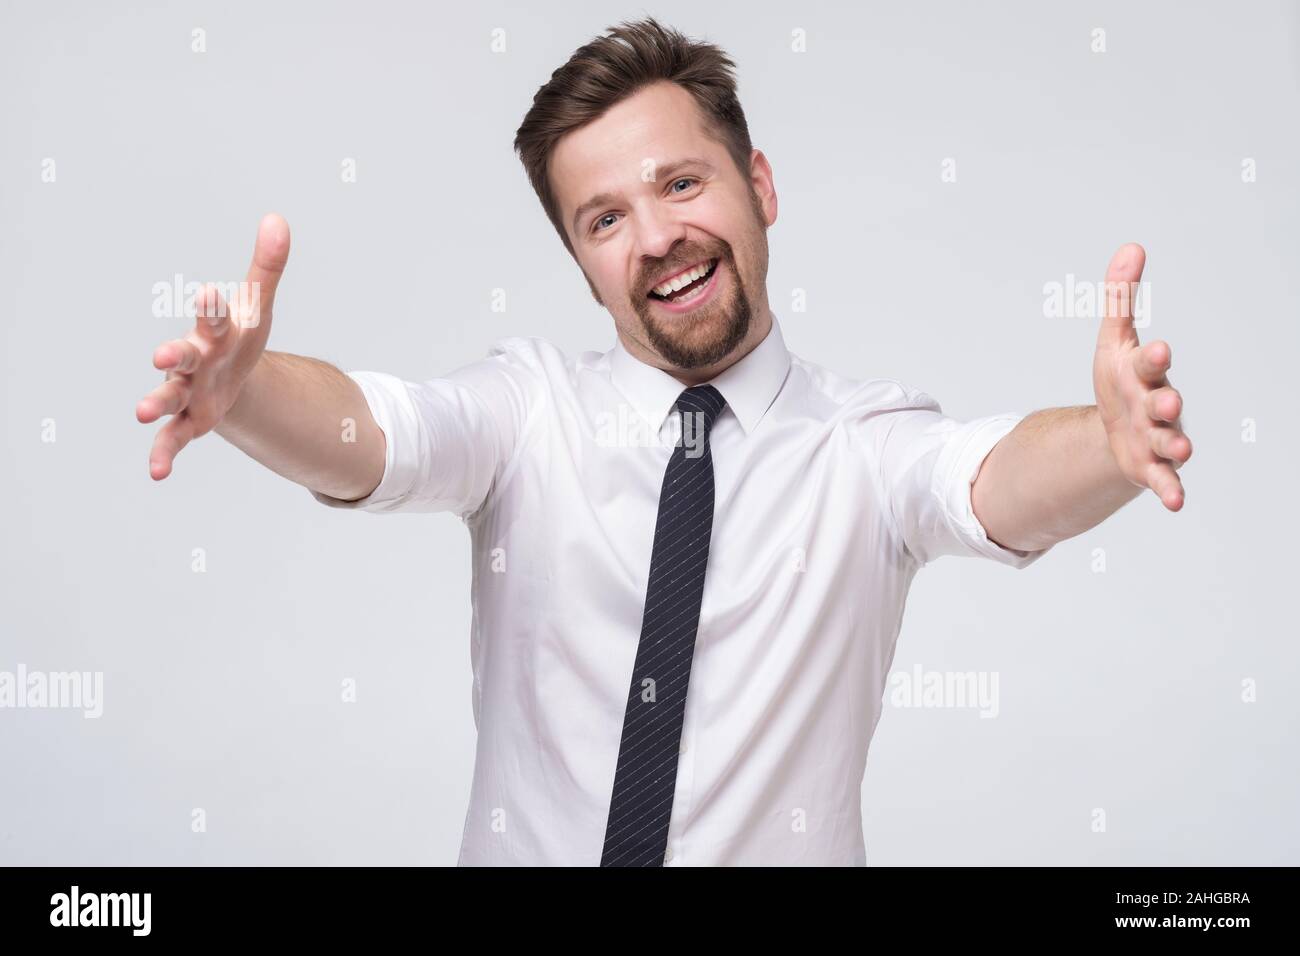 Coworker with moustache pulling hands towards camera and smiling friendly at camera wanting hug Stock Photo